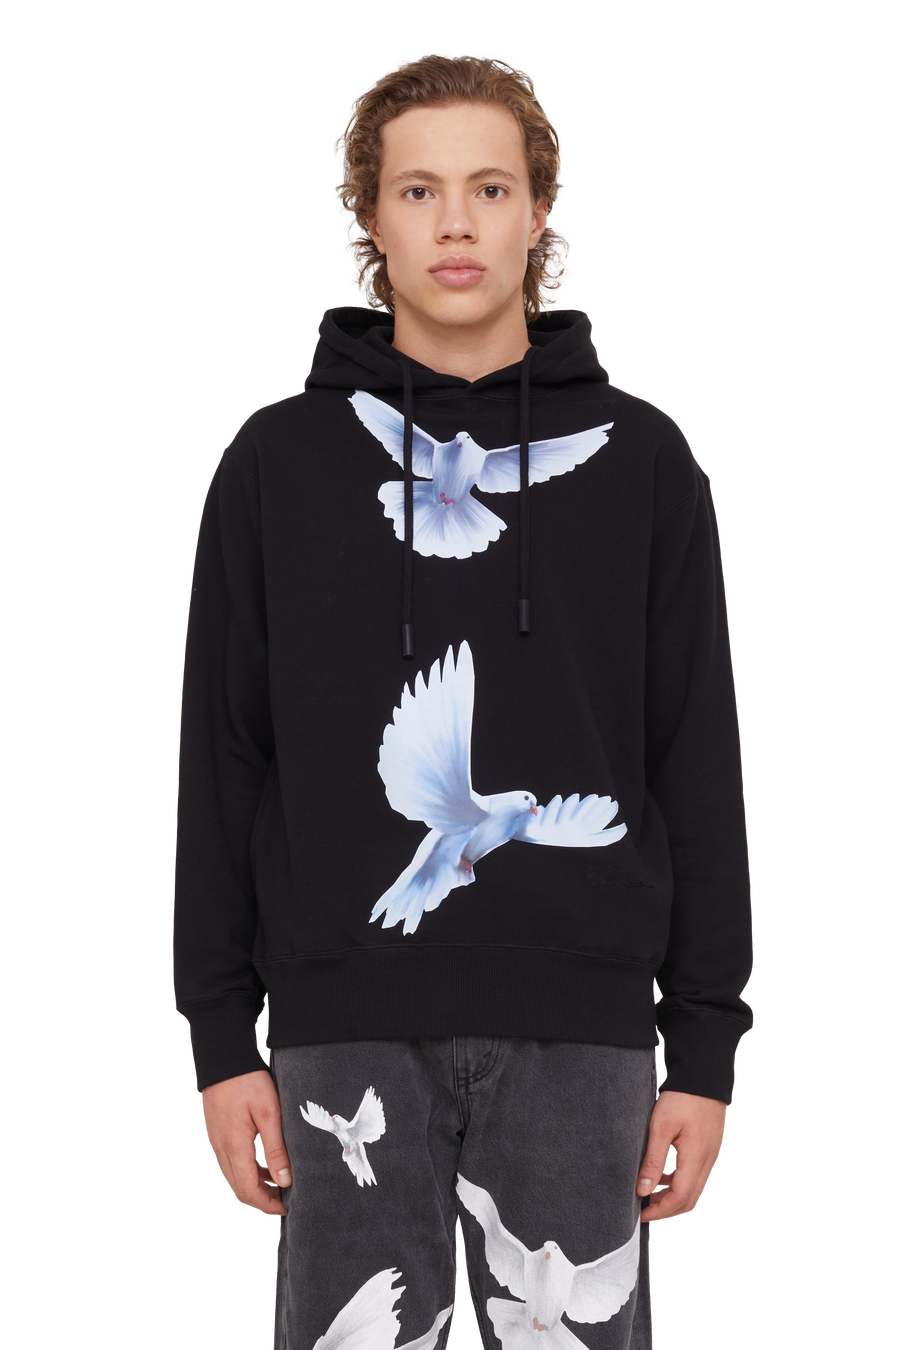 FREEDOM DOVES BLACK HOODED SWEATER